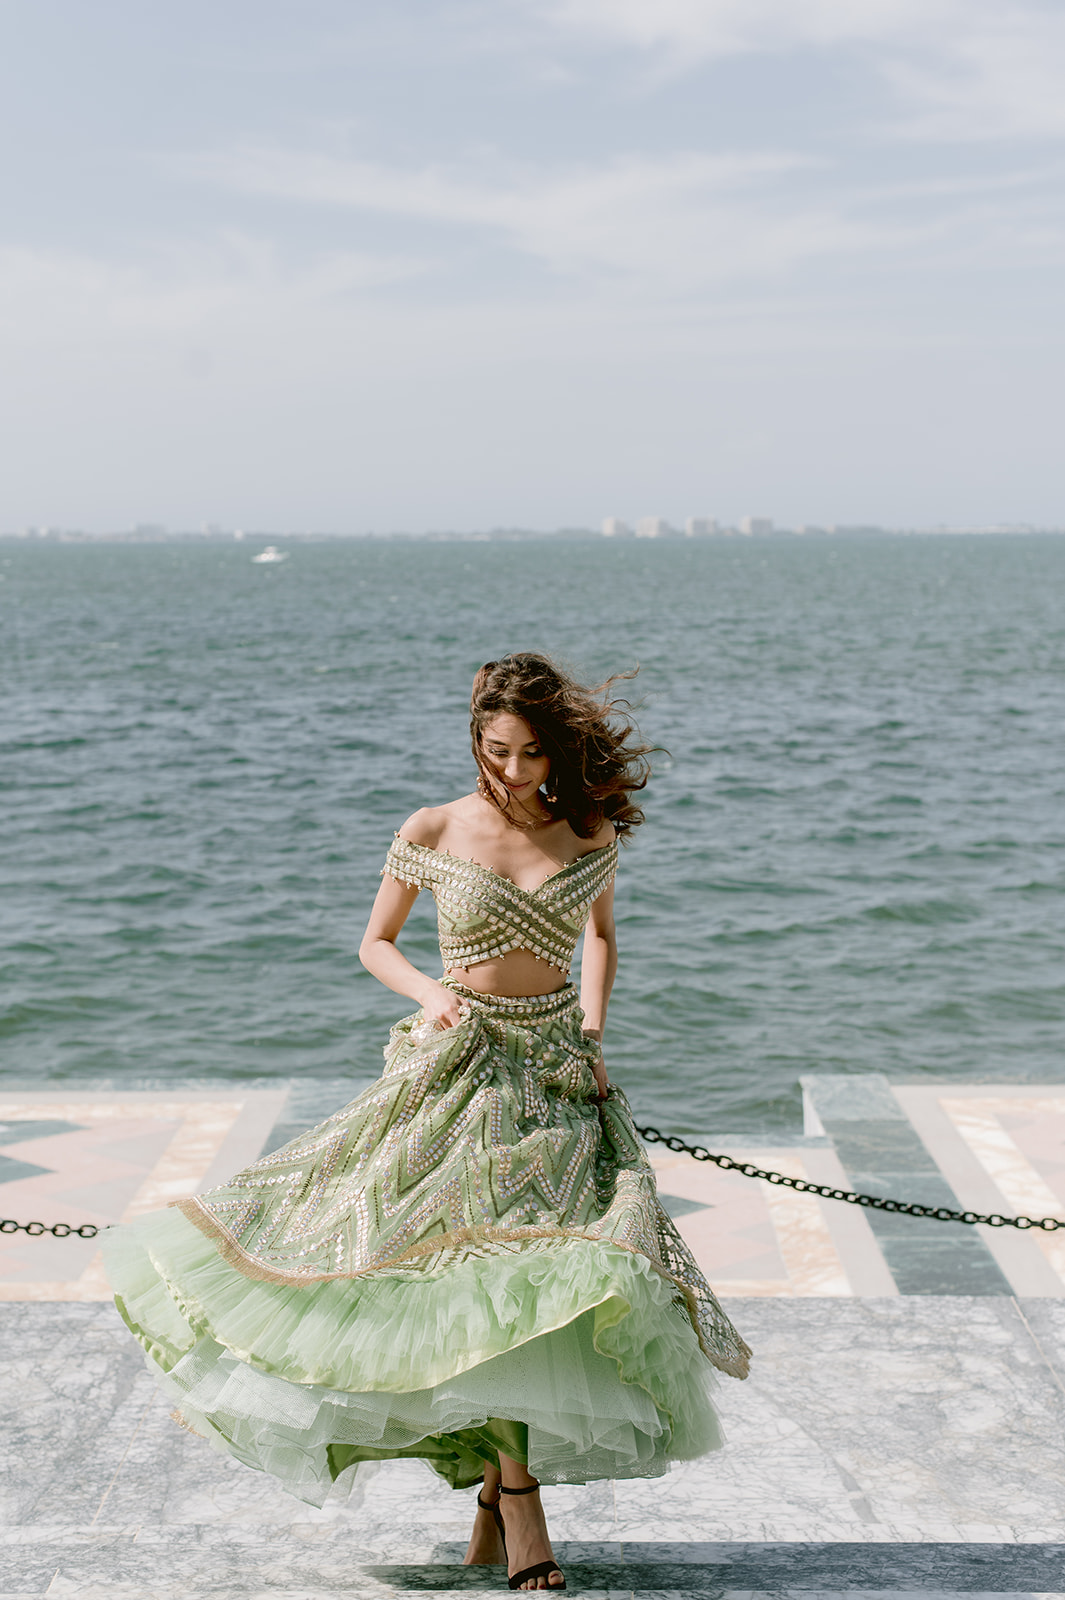 "Ringling Museum engagement session captures the beauty and essence of Indian love"
